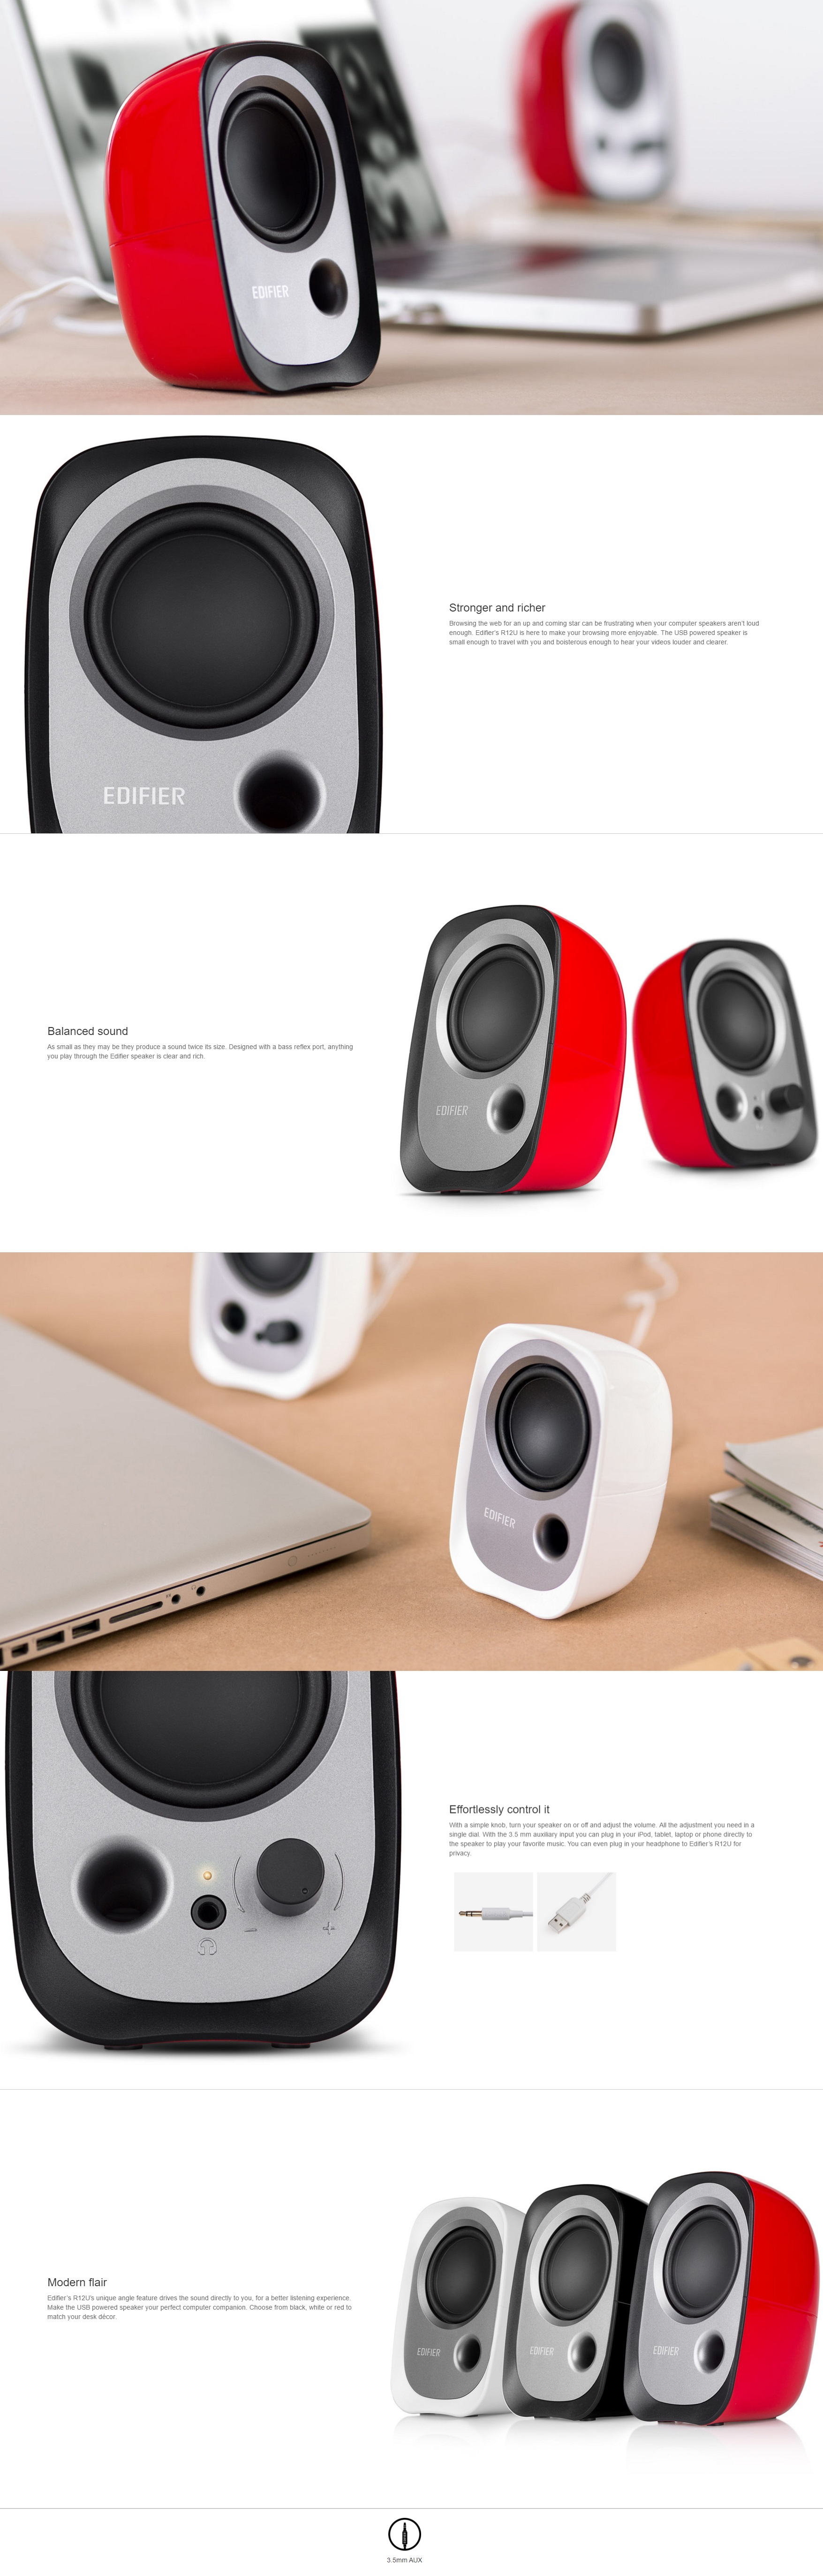 A large marketing image providing additional information about the product Edifier R12U 2.0 USB Speakers Black - Additional alt info not provided